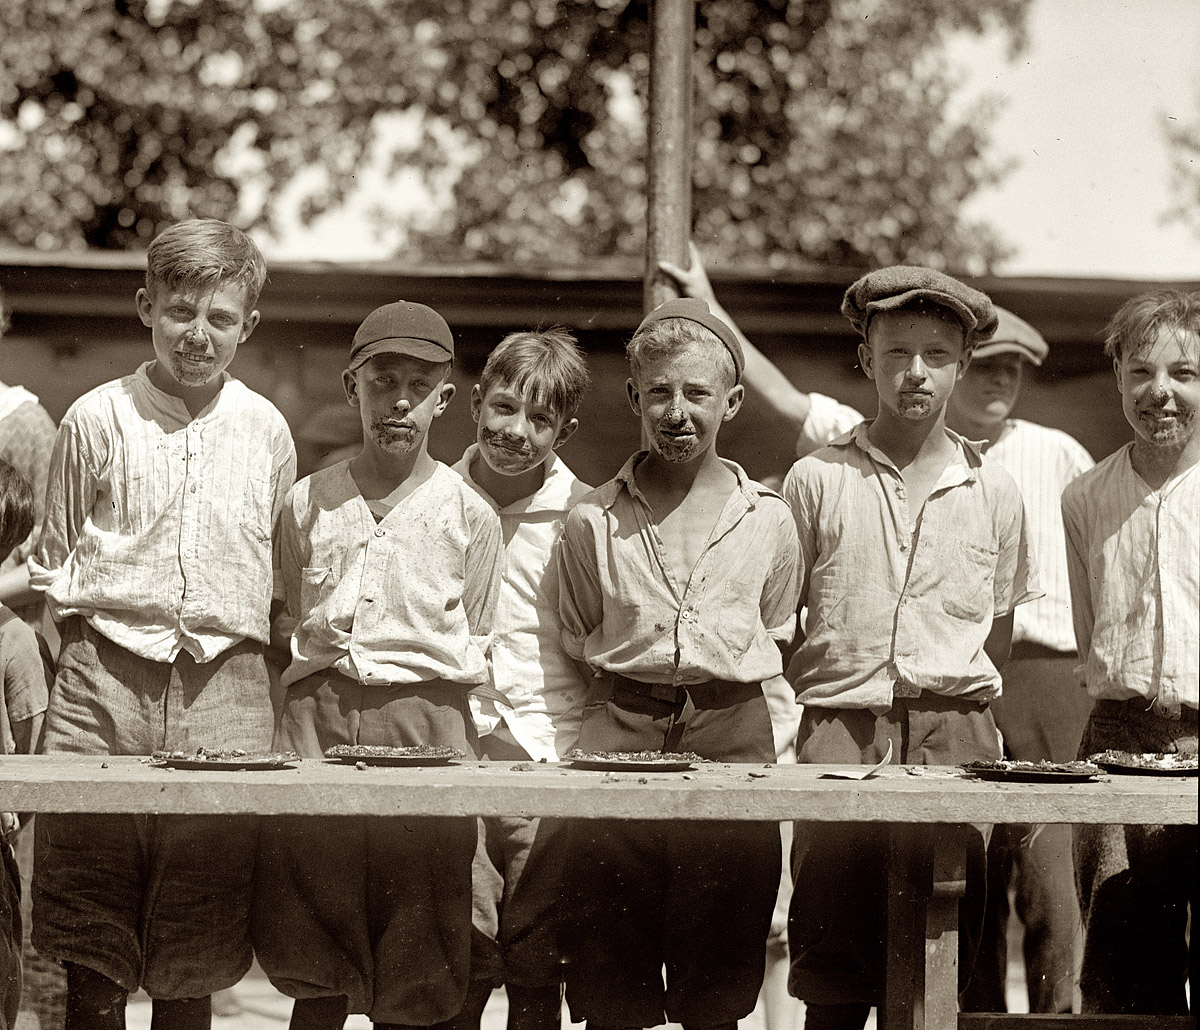 August 2, 1923. Washington, D.C. "Pie eating contest, Jefferson School." National Photo Company Collection glass negative. View full size.